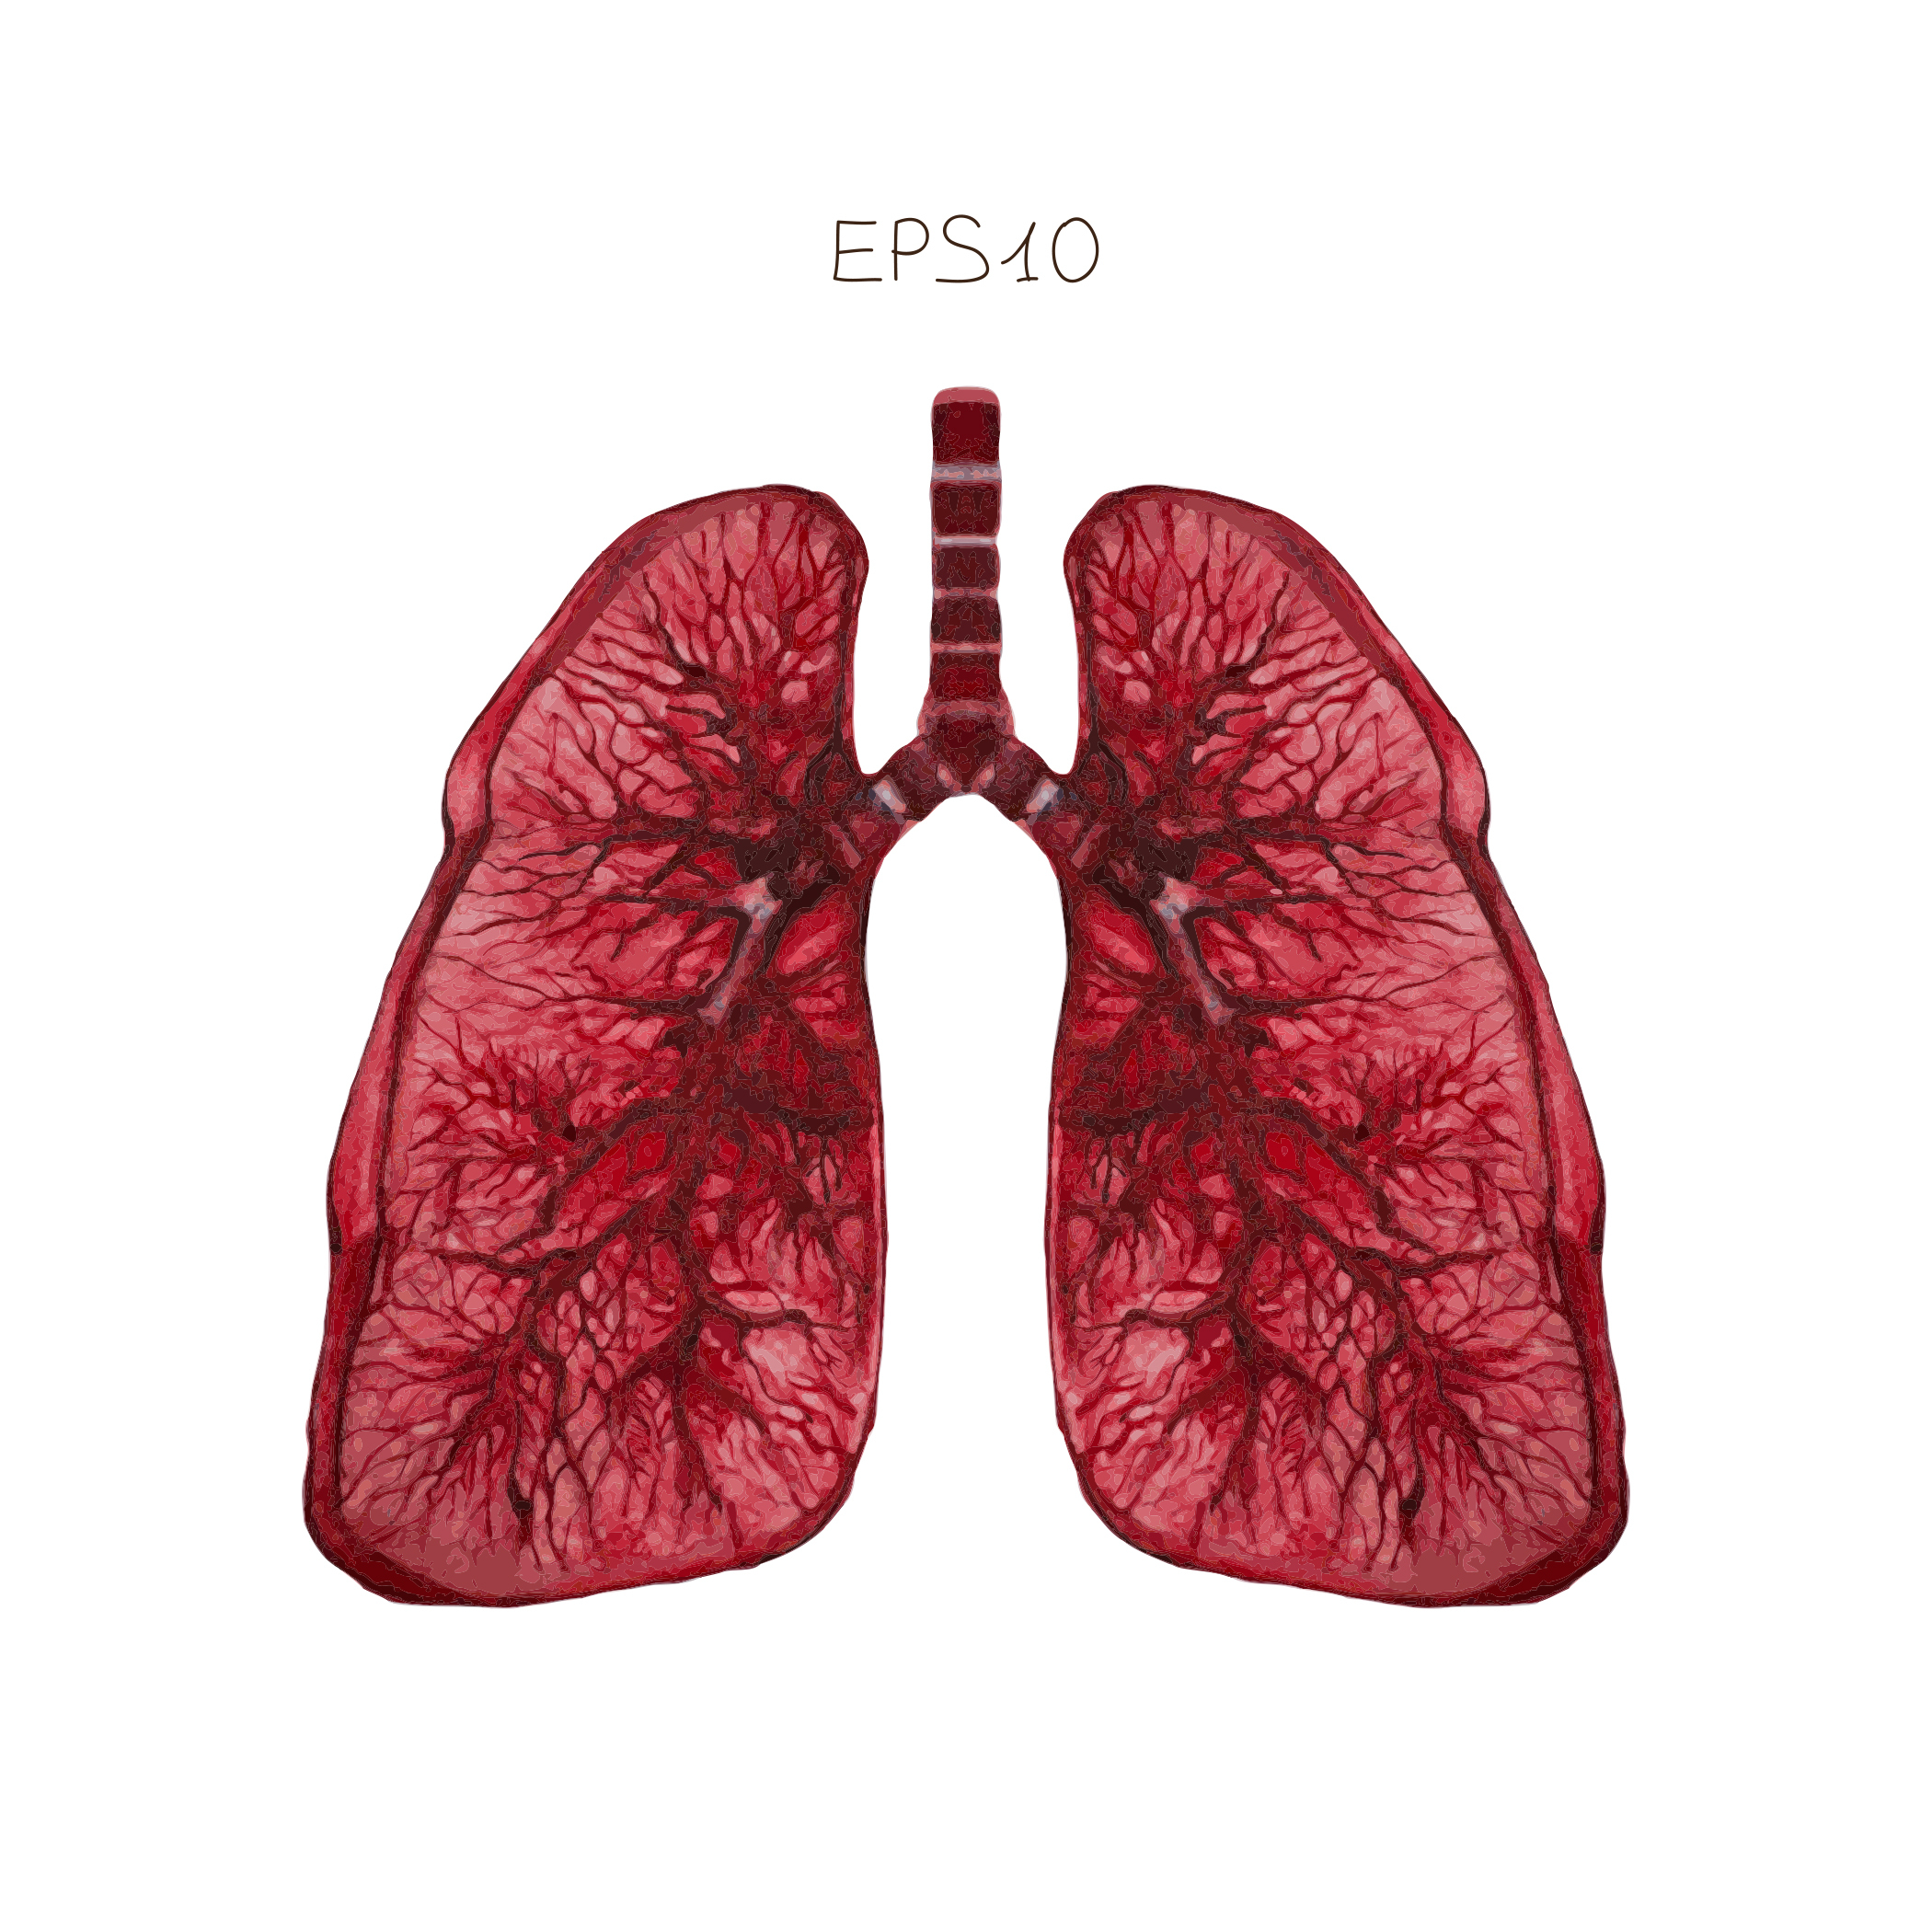 Researchers Discover KLF4 is a Crucial Factor in Pulmonary Hypertension